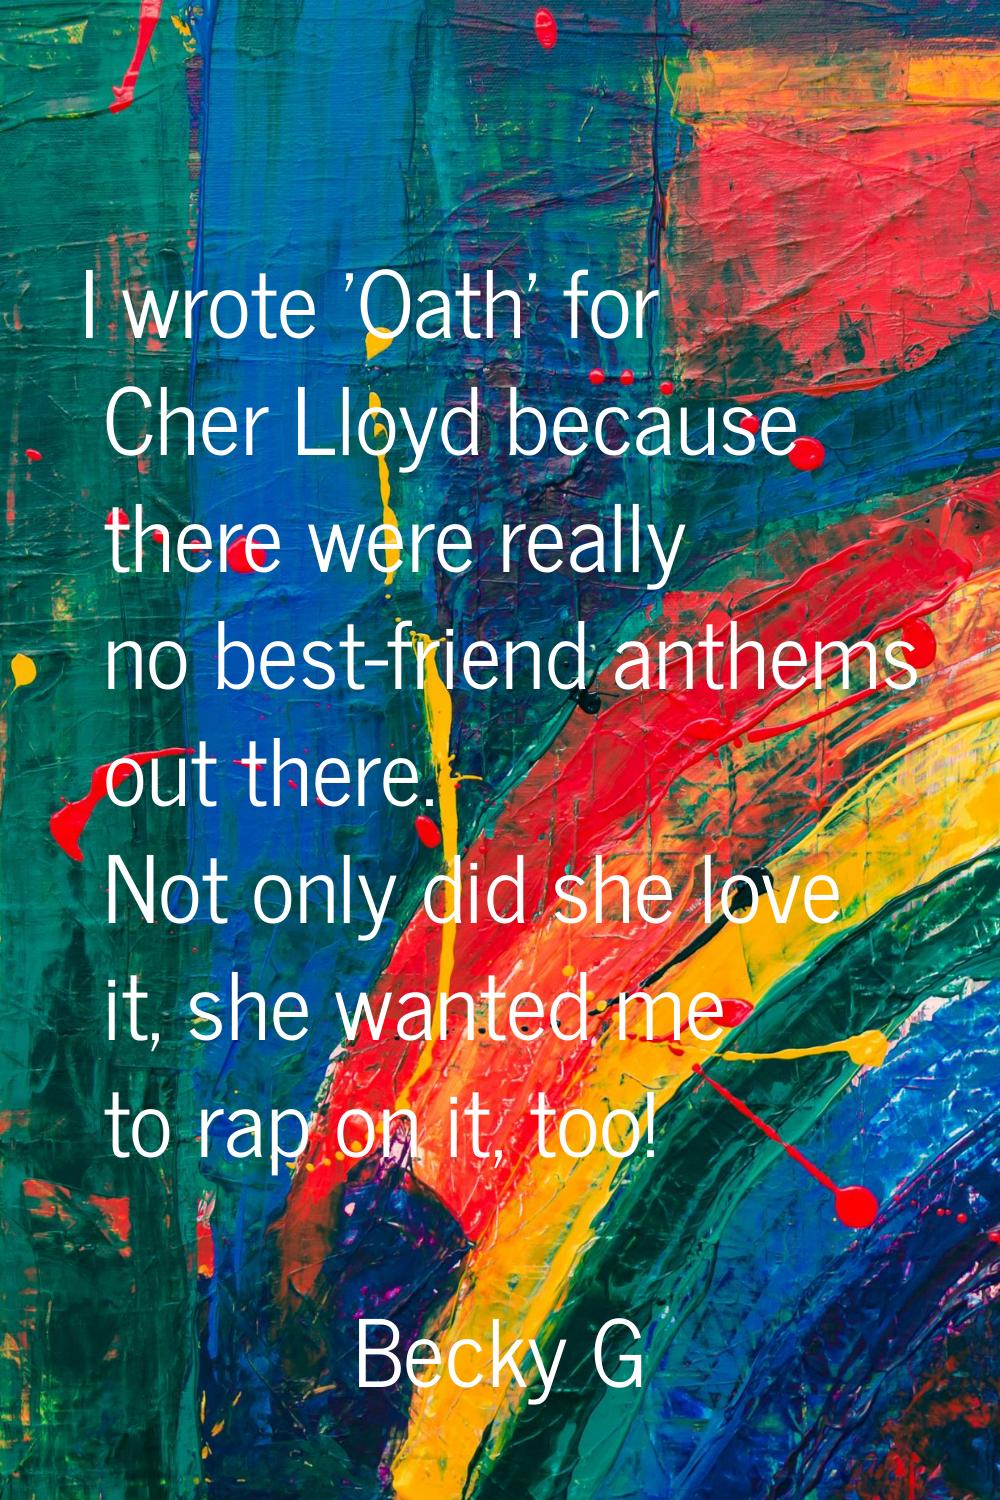 I wrote 'Oath' for Cher Lloyd because there were really no best-friend anthems out there. Not only 